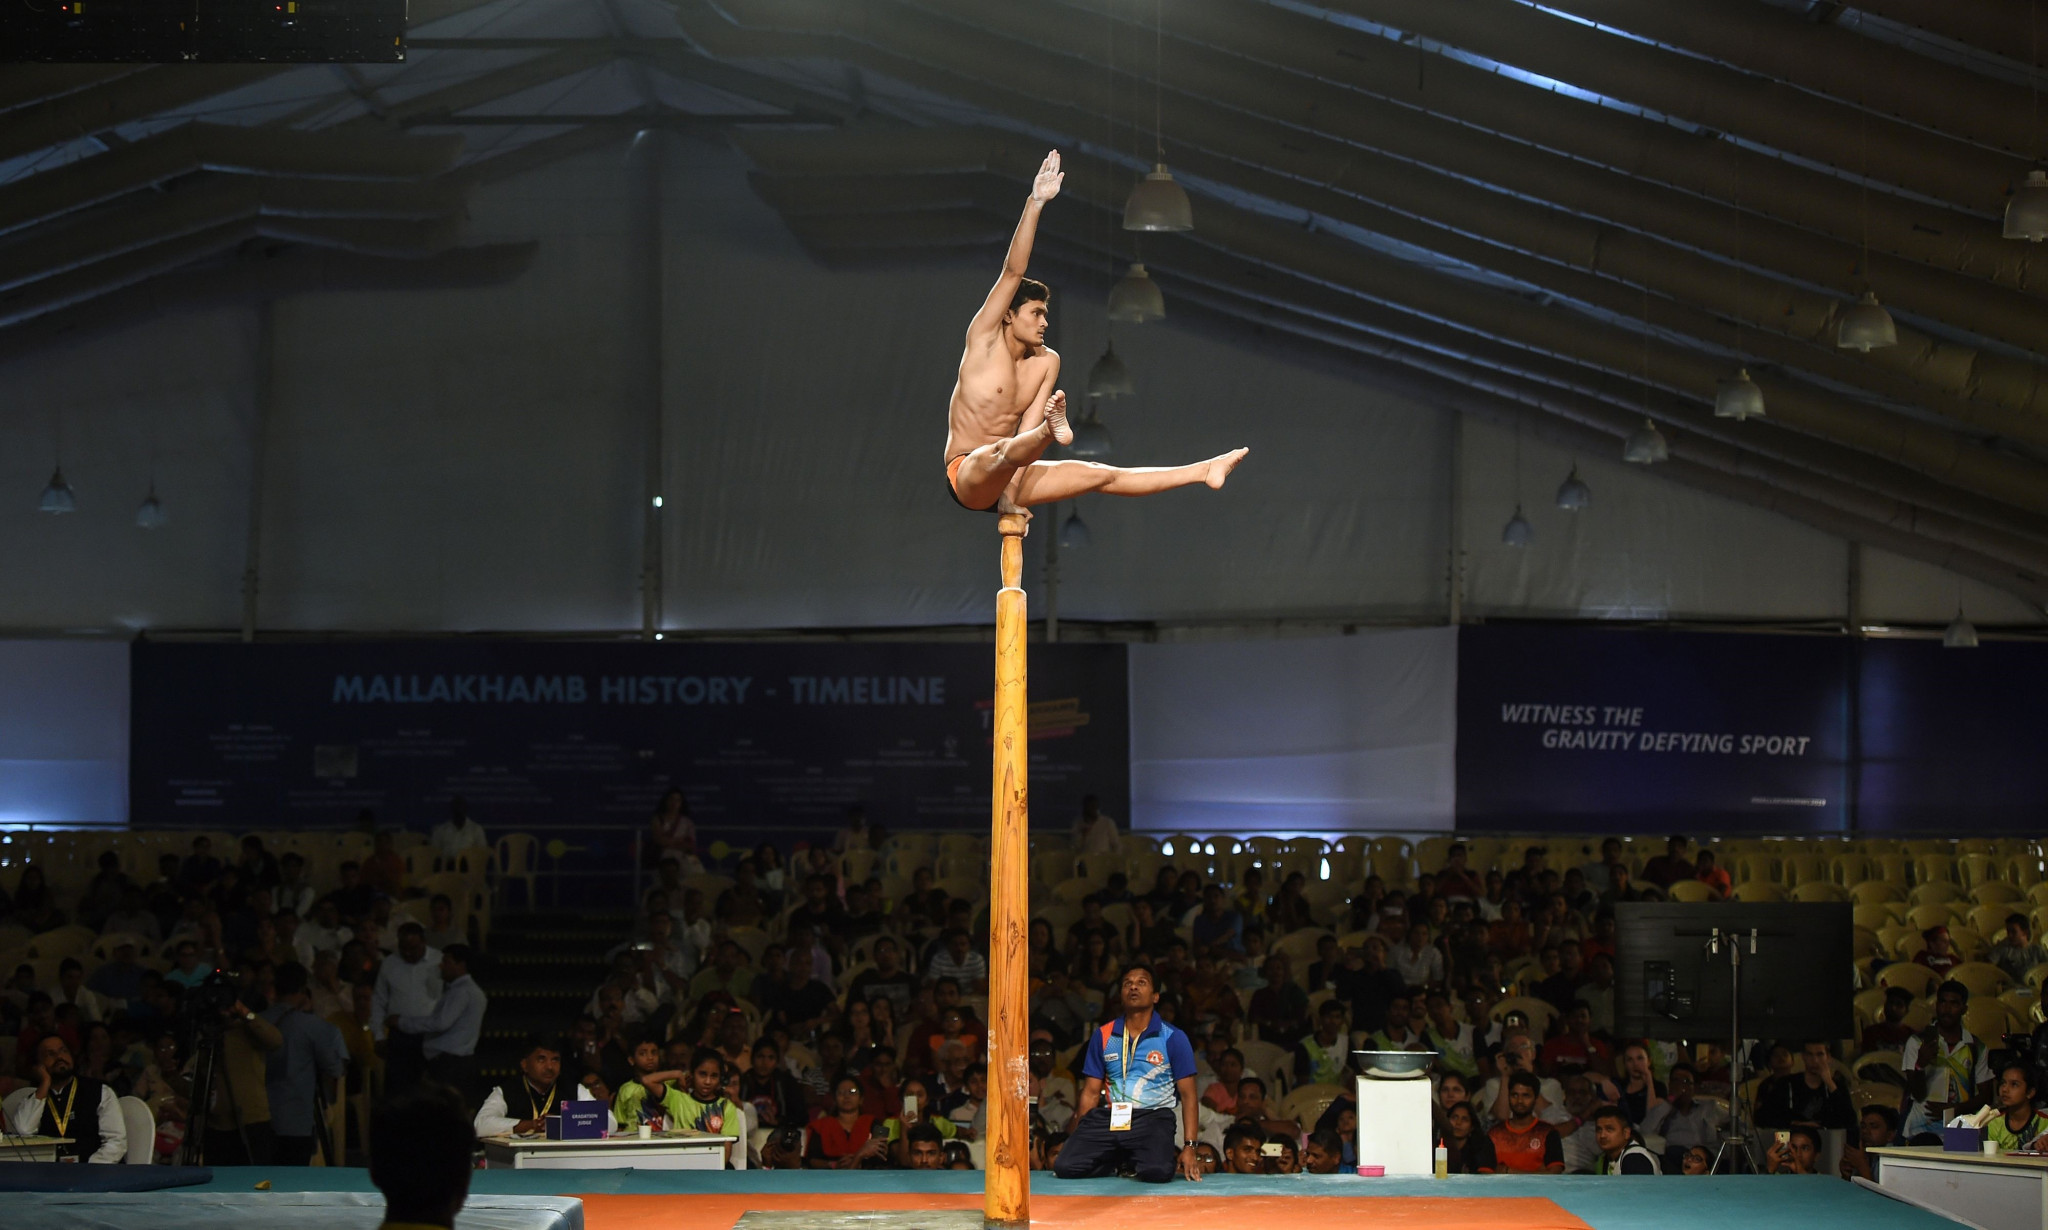 Mallakhamb, a form of aerial yoga or gymnastics where athletes perform on a vertical pillar, has launched a campaign to be part of the 2028 Olympics in Los Angeles ©Getty Images